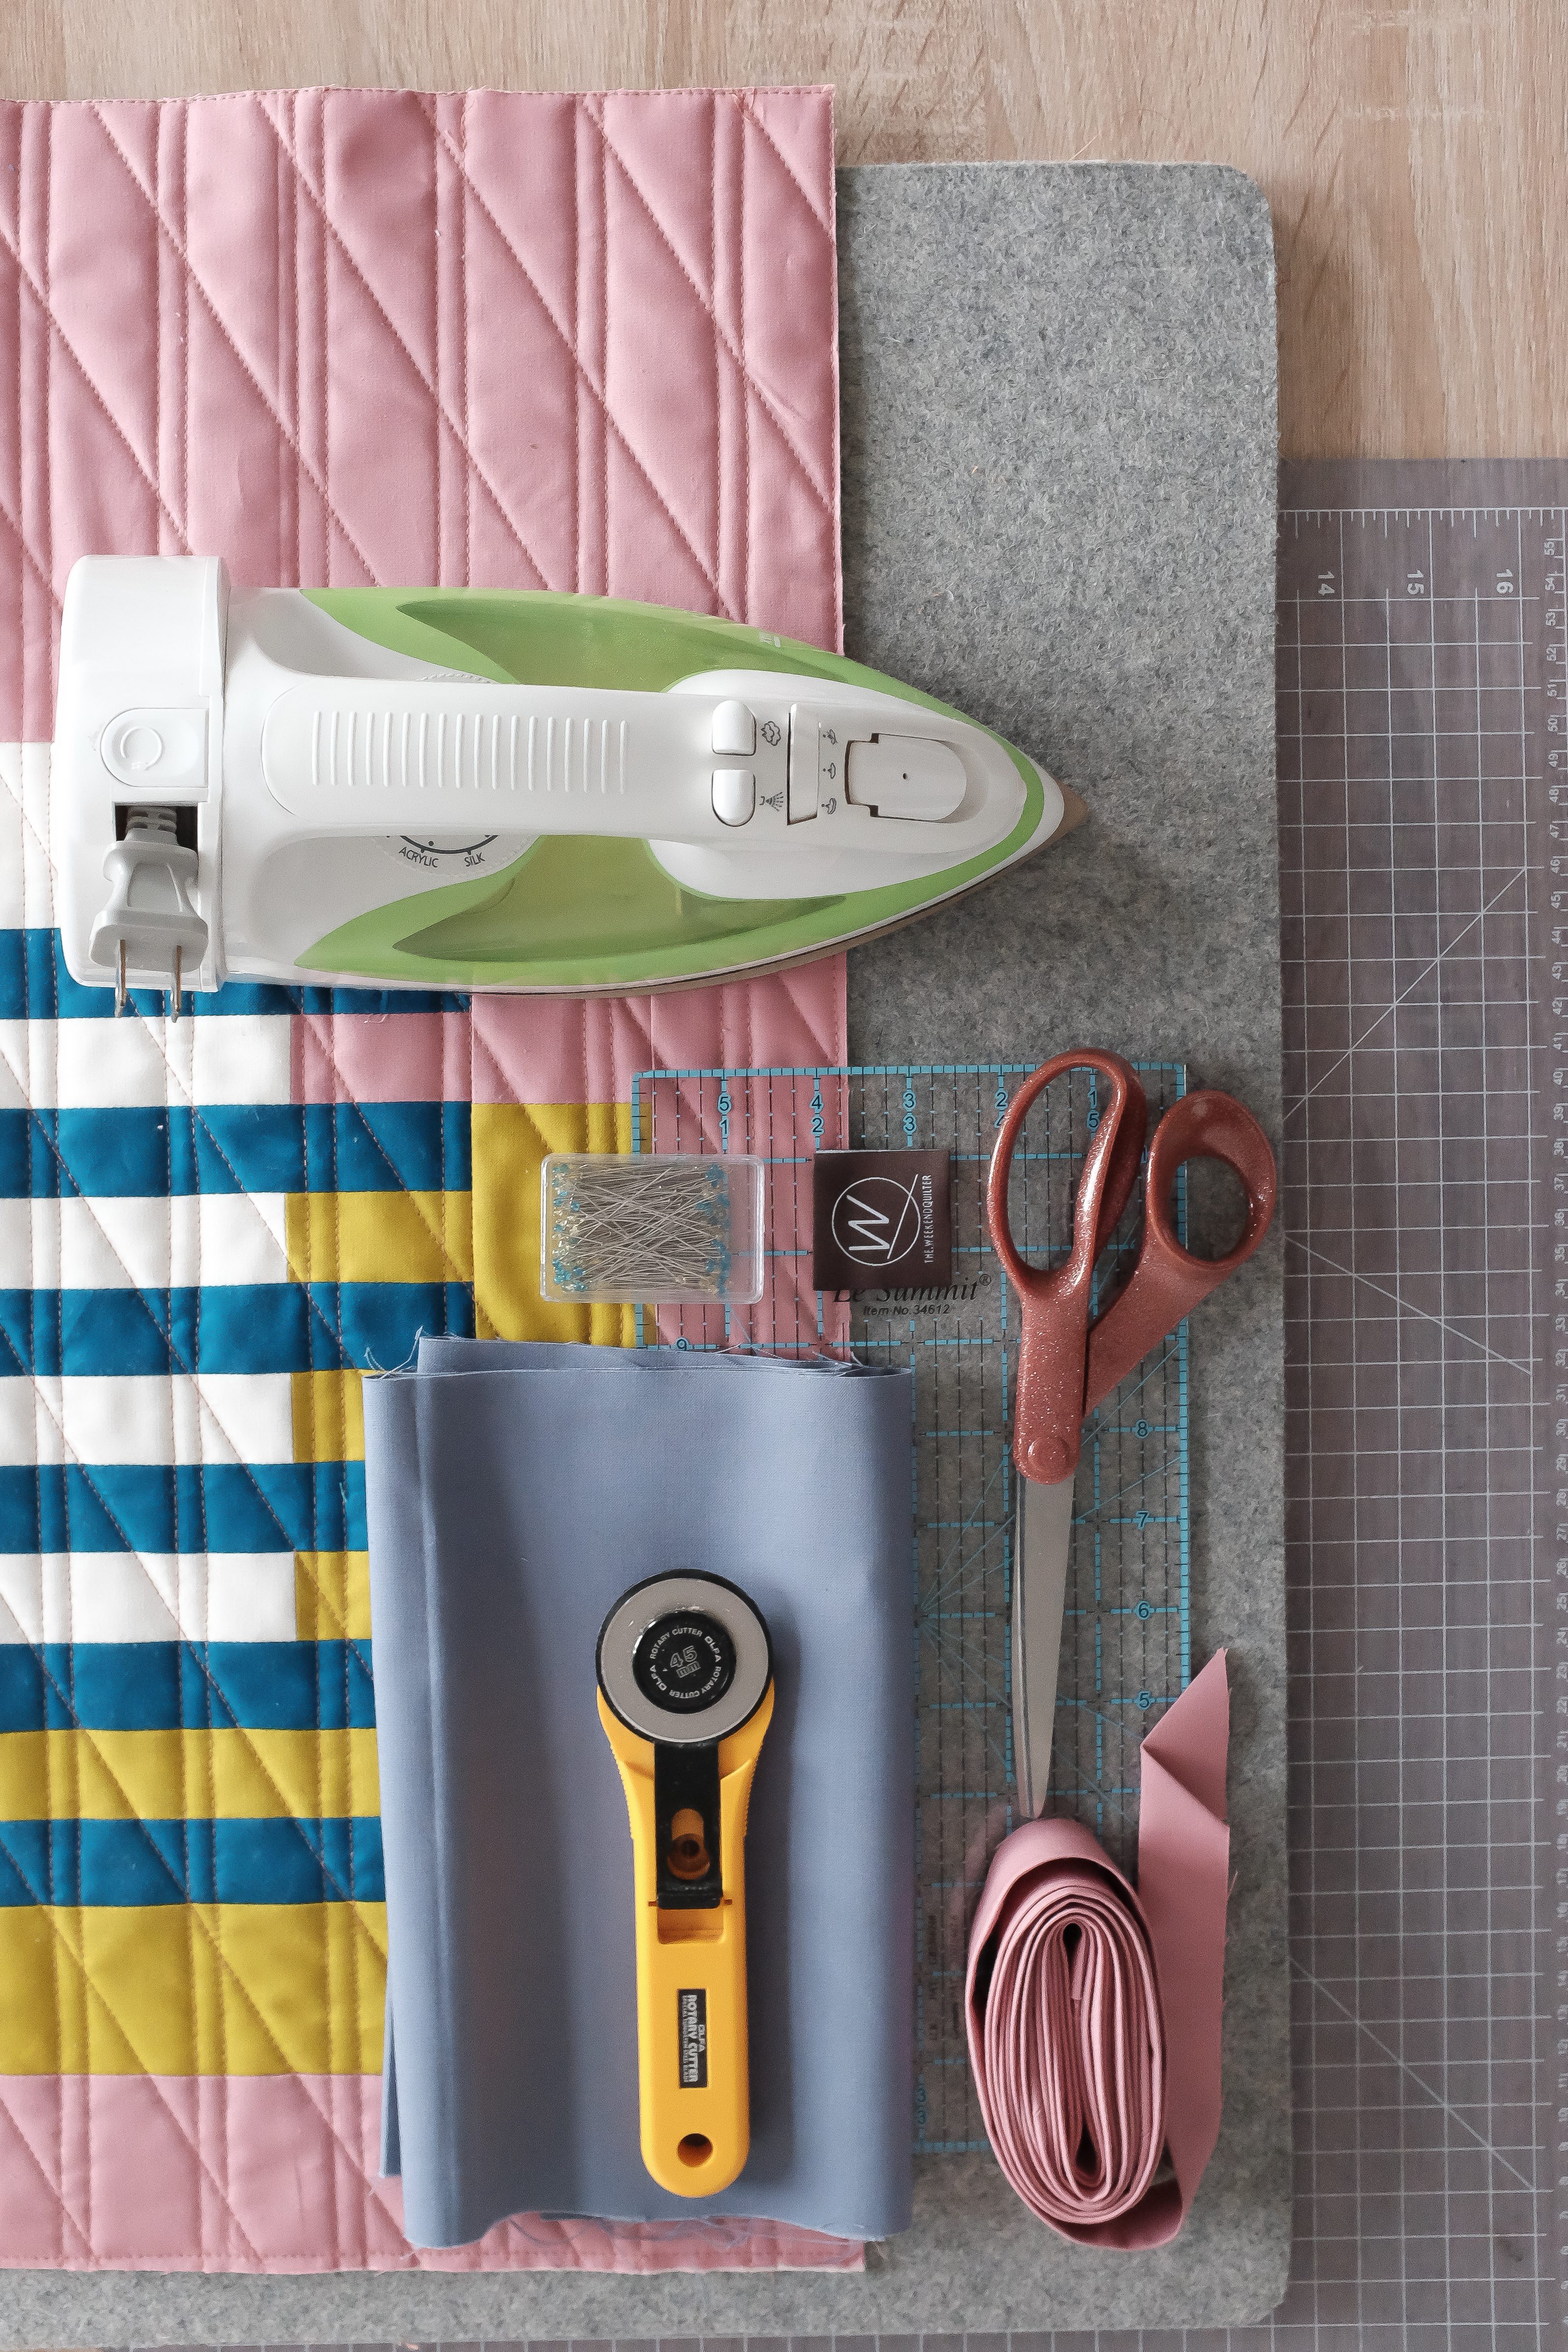 An iron, scissors, rotary cutter, fabric, and a pressing mat